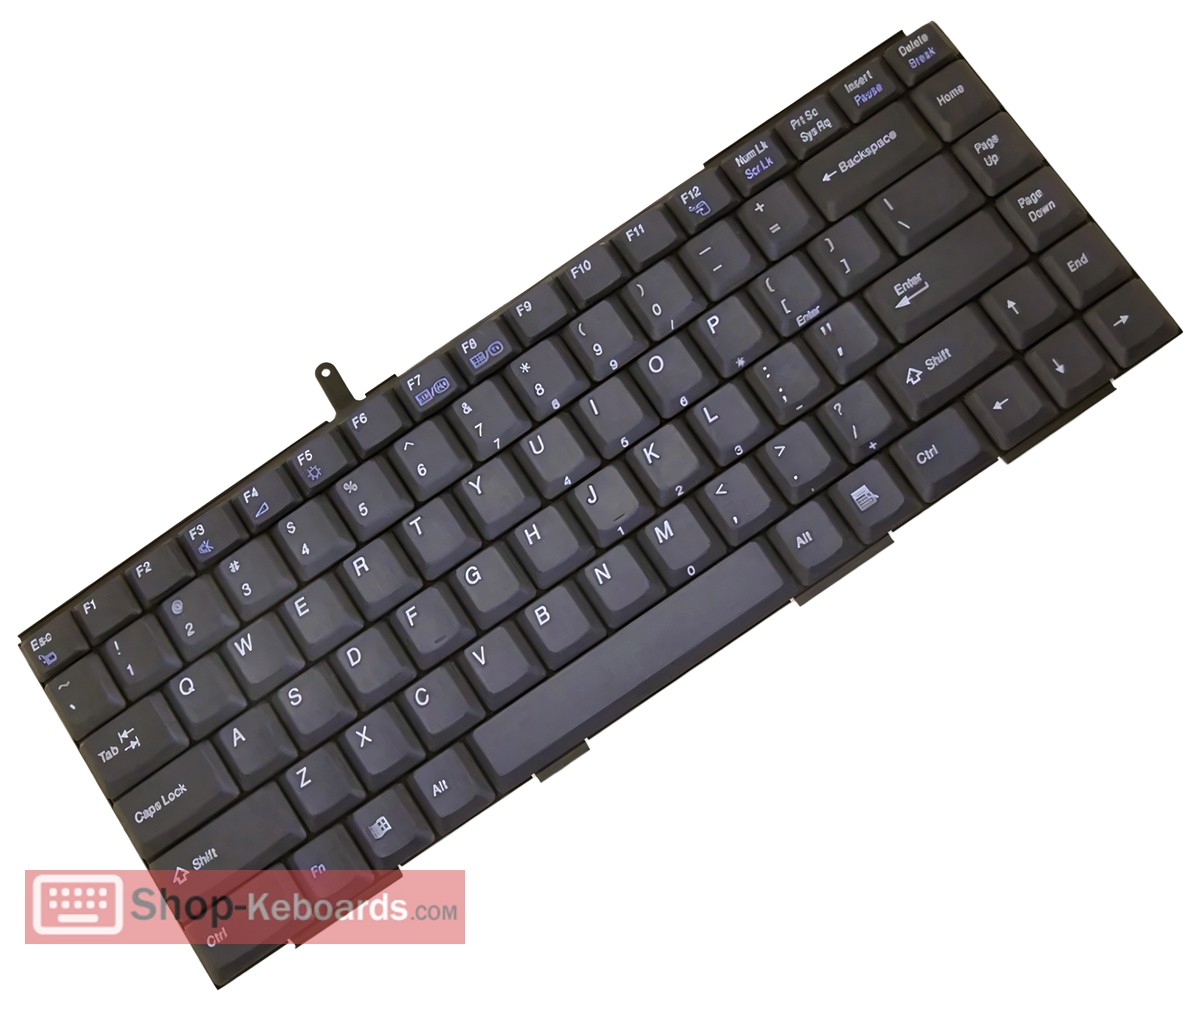 Sony VAIO PCG-F580 Keyboard replacement